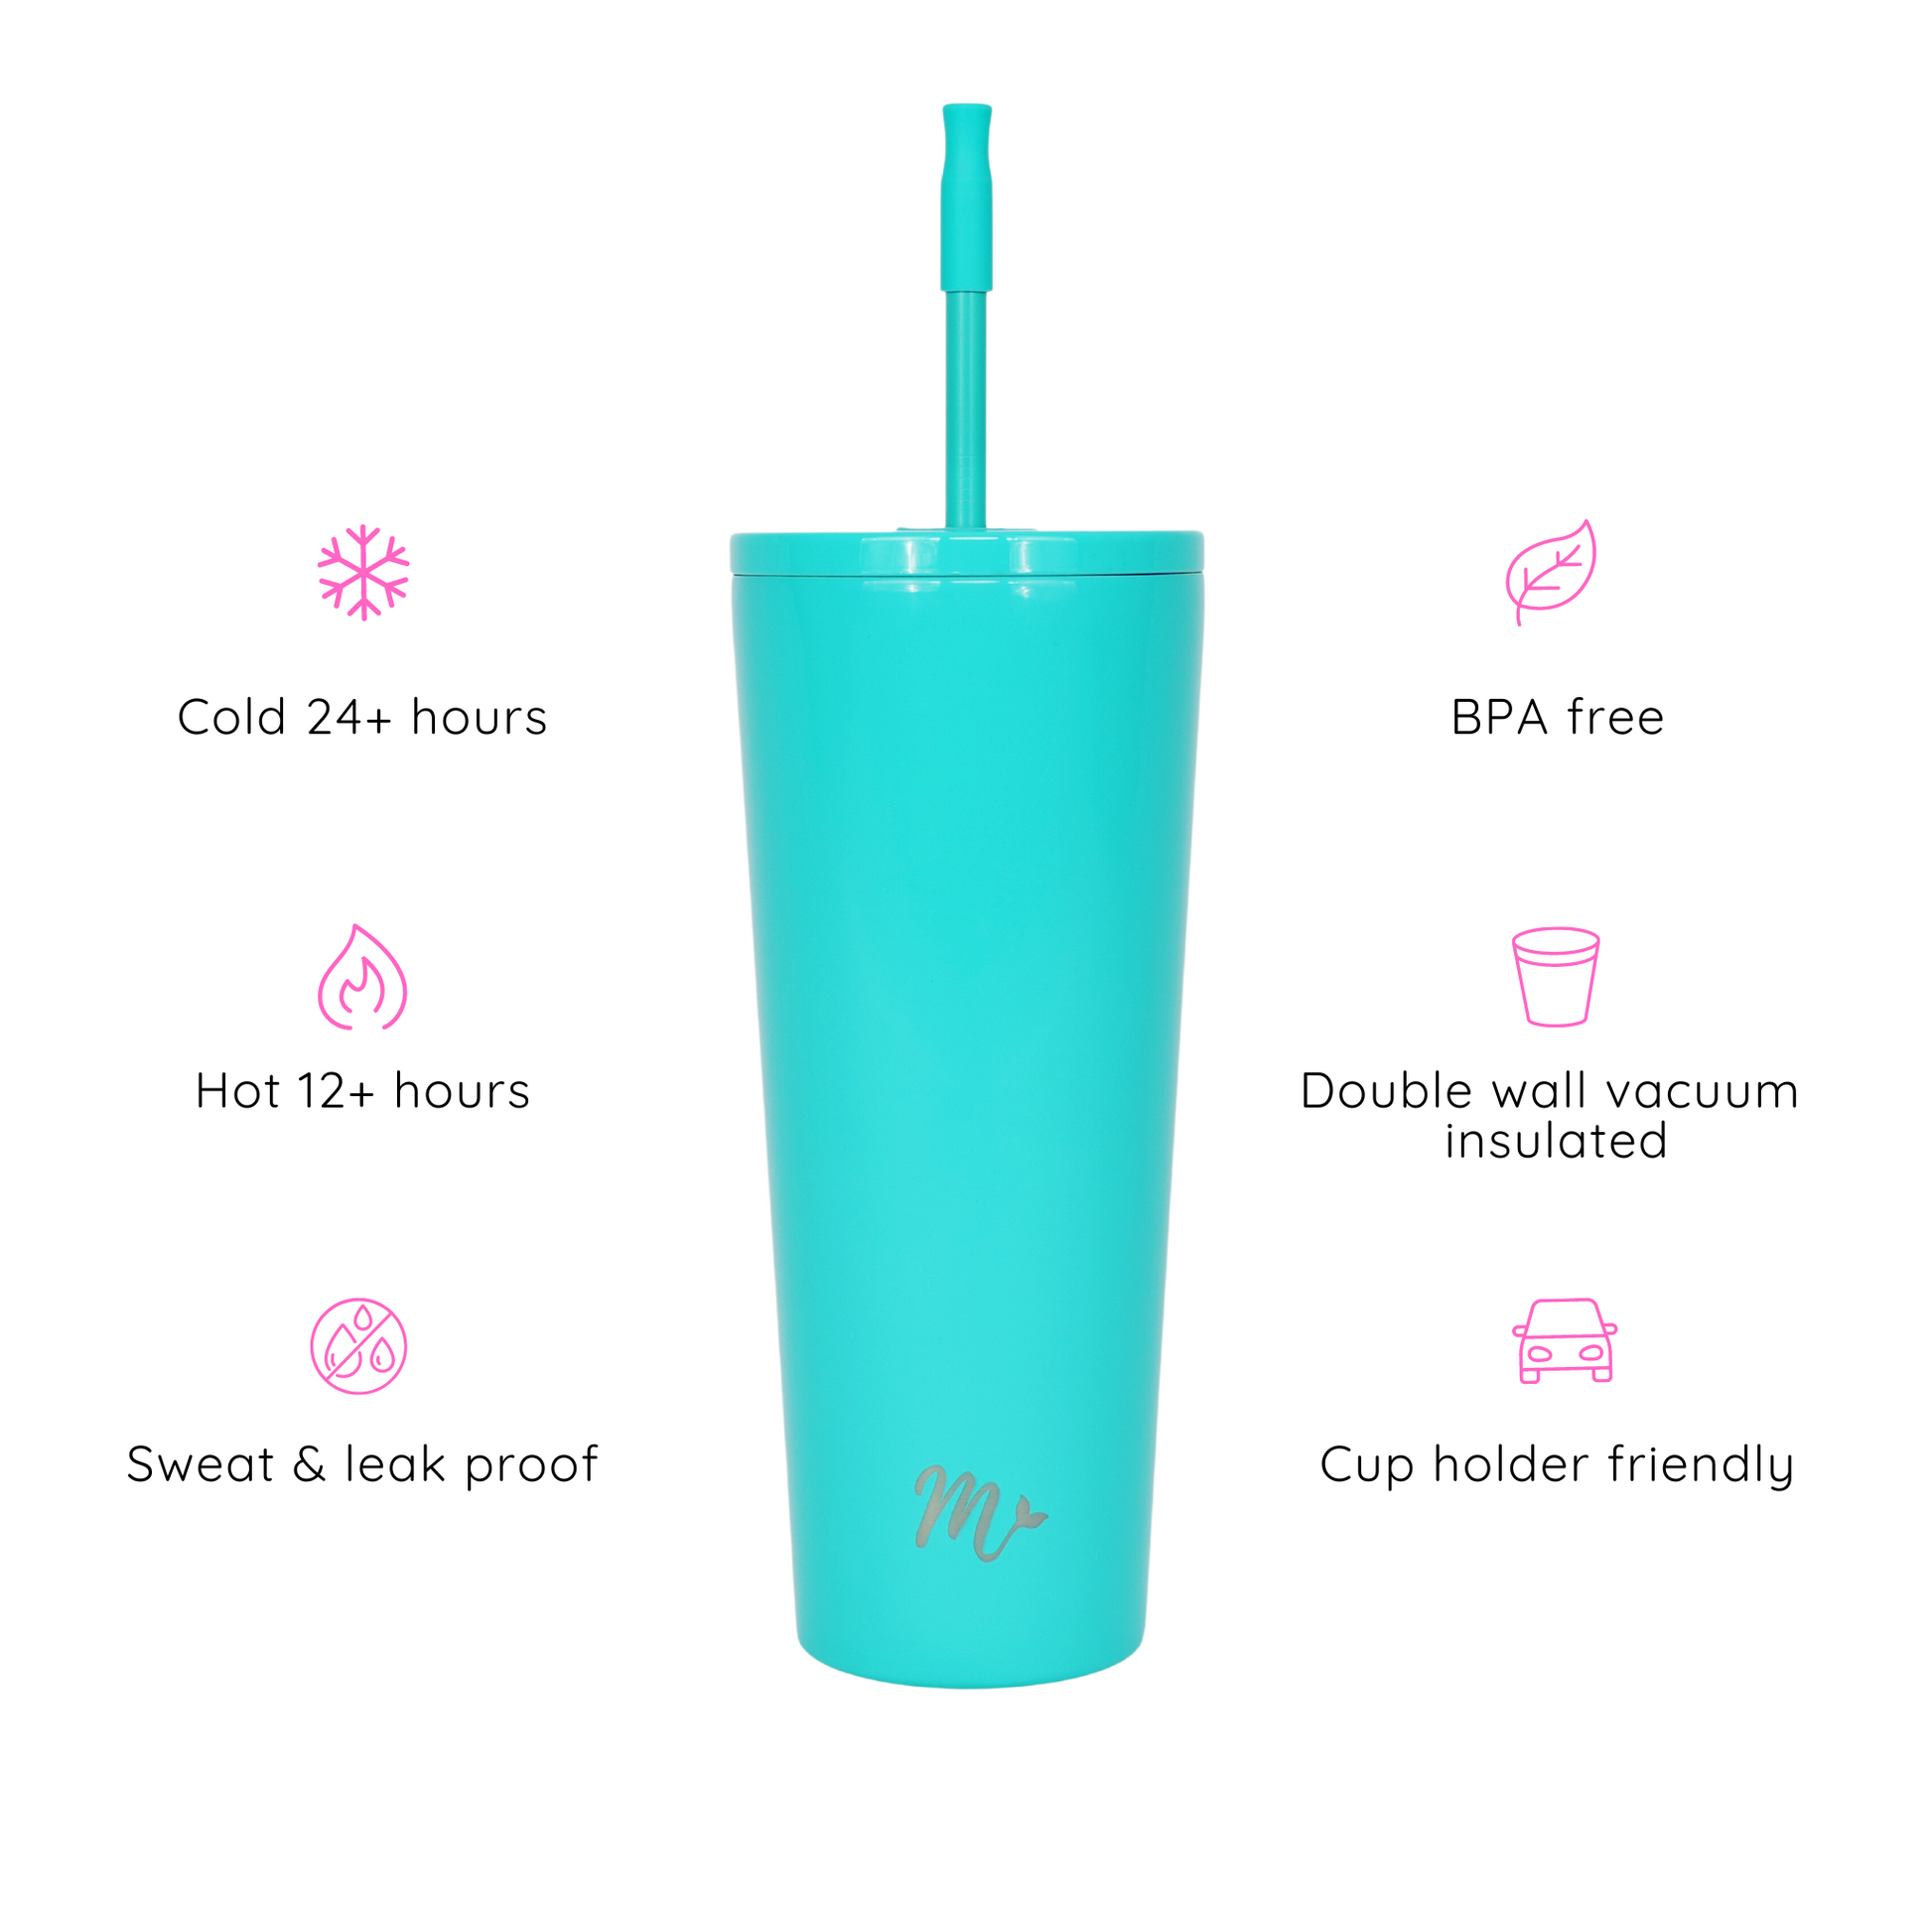 22oz Turquoise Cup